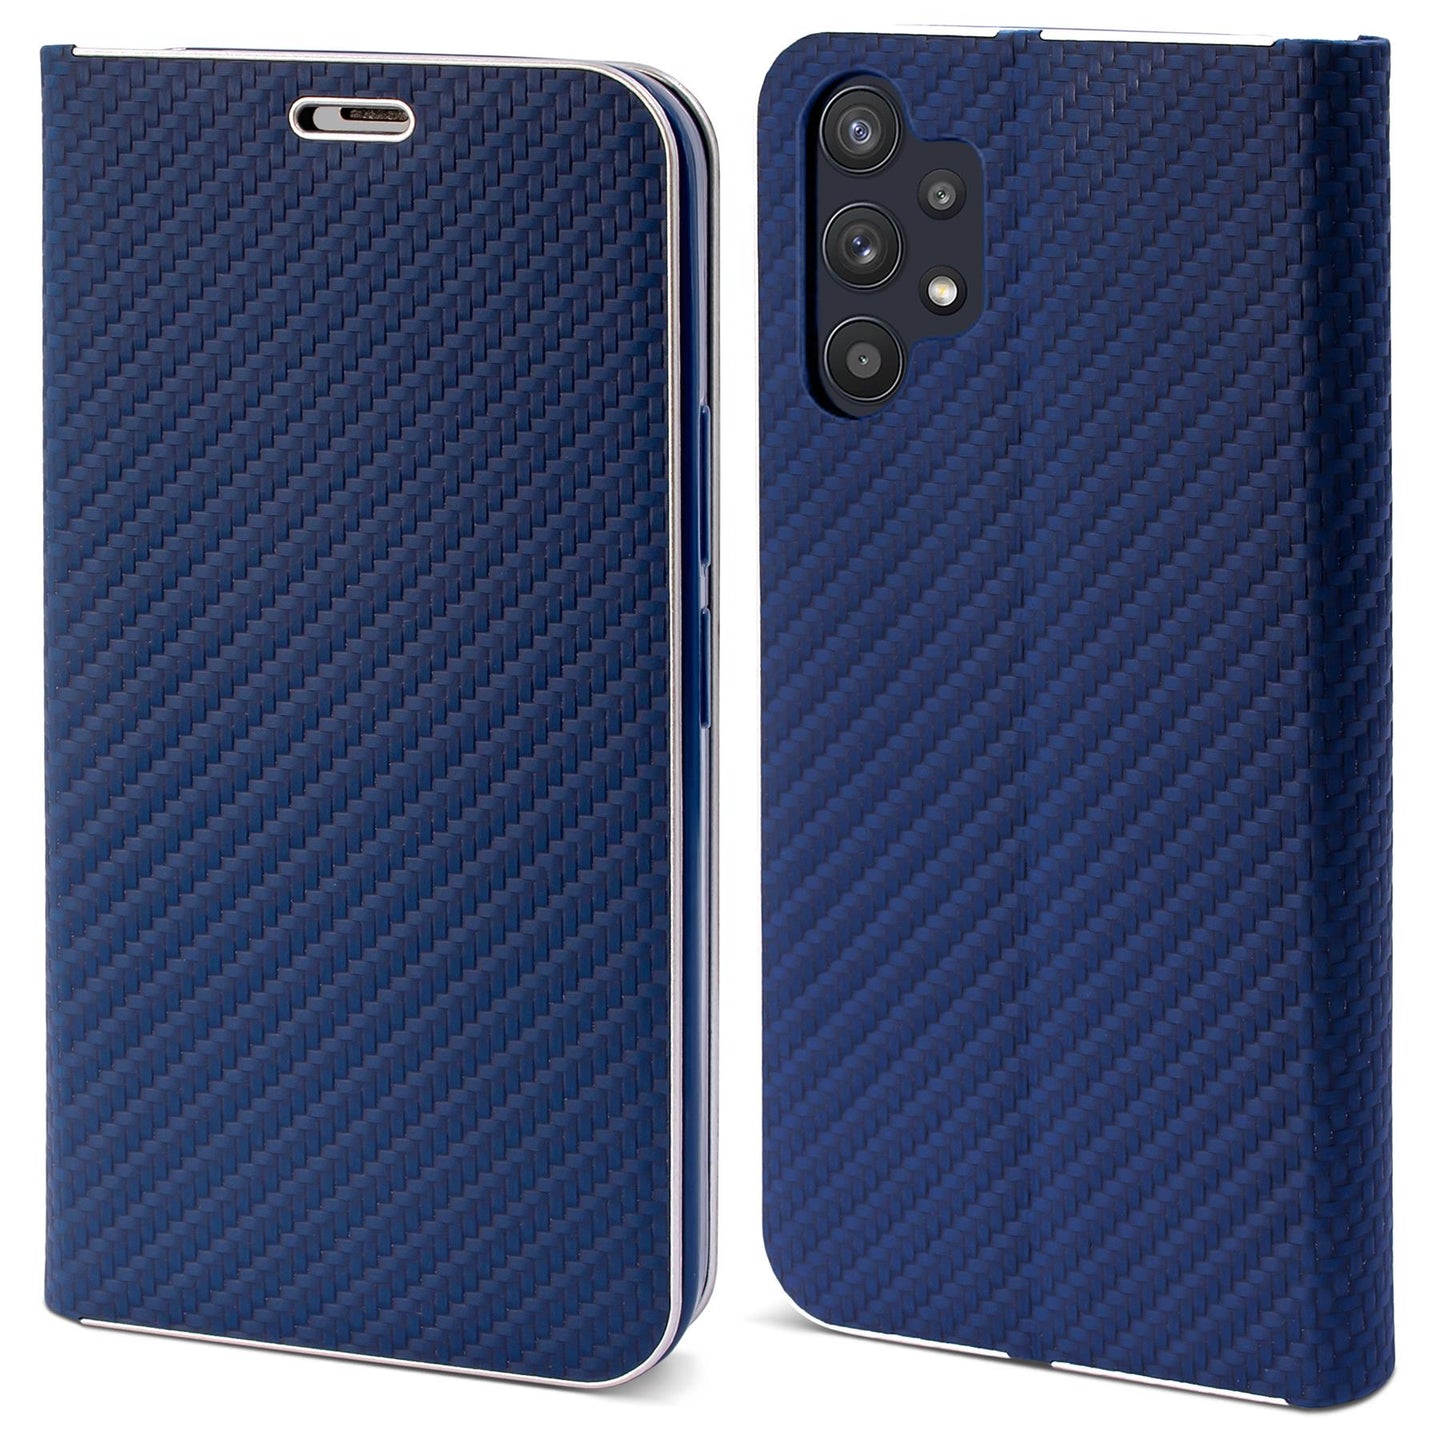 Moozy Wallet Case for Samsung A32 5G, Dark Blue Carbon - Flip Case with Metallic Border Design Magnetic Closure Flip Cover with Card Holder and Kickstand Function